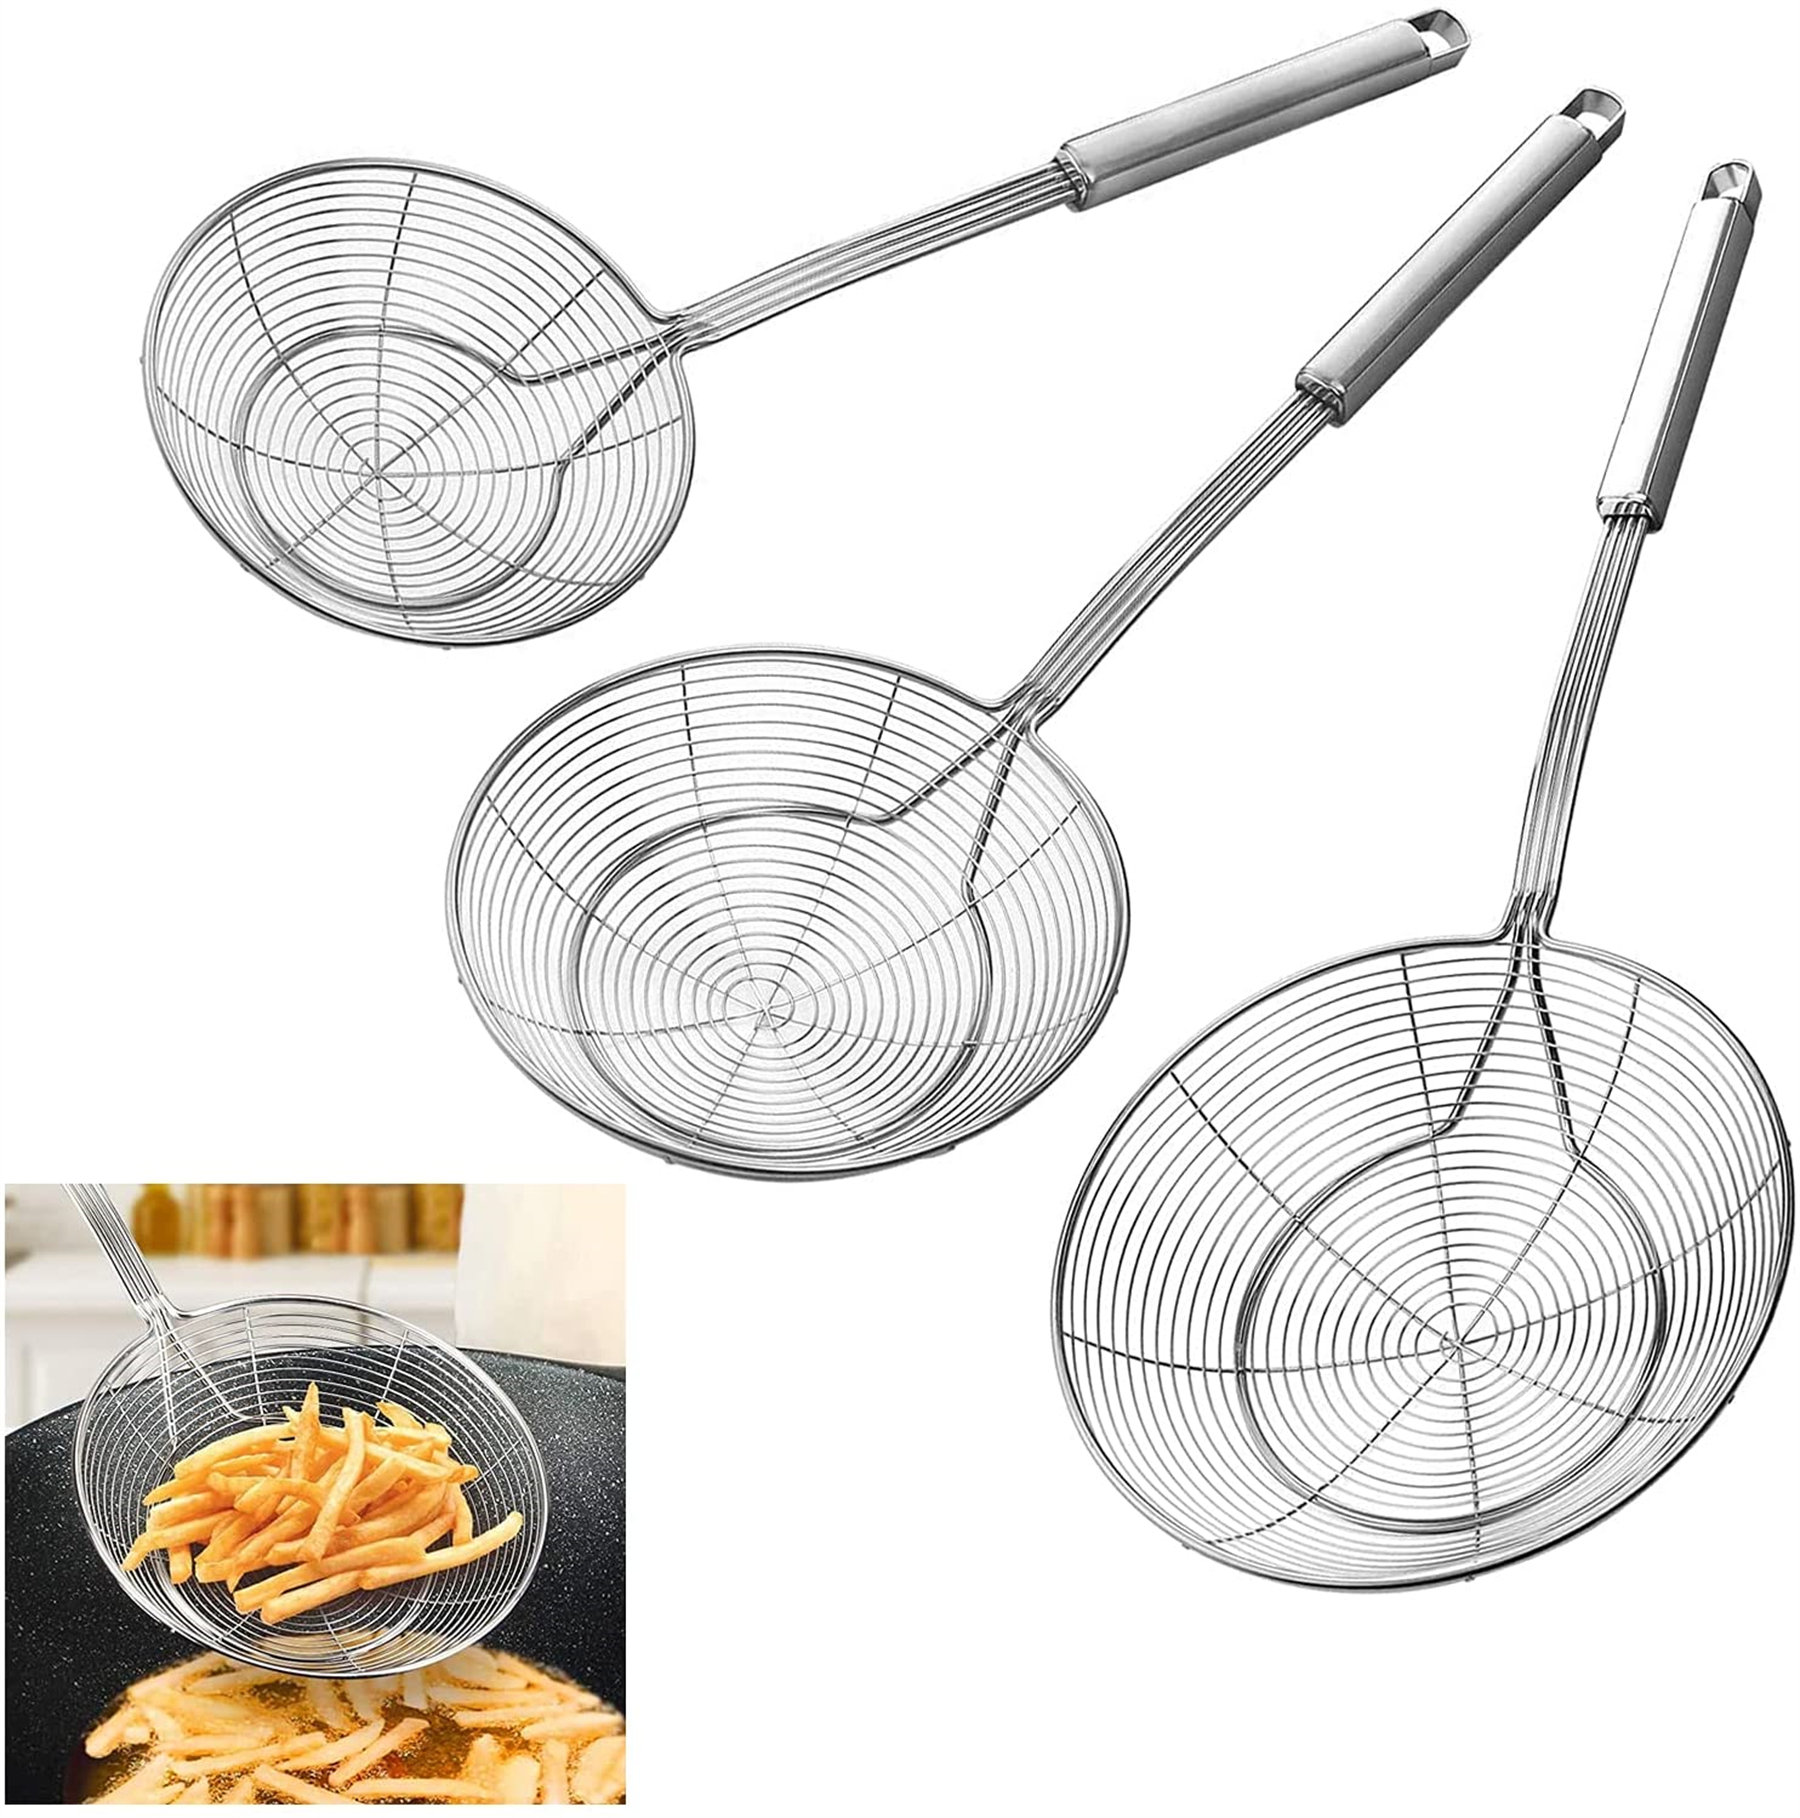 Stainless Steel Spider Strainer With Handle,Solid Spider Strainer Skimmer Ladle With Handle Stainless Steel Kitchen Tool 